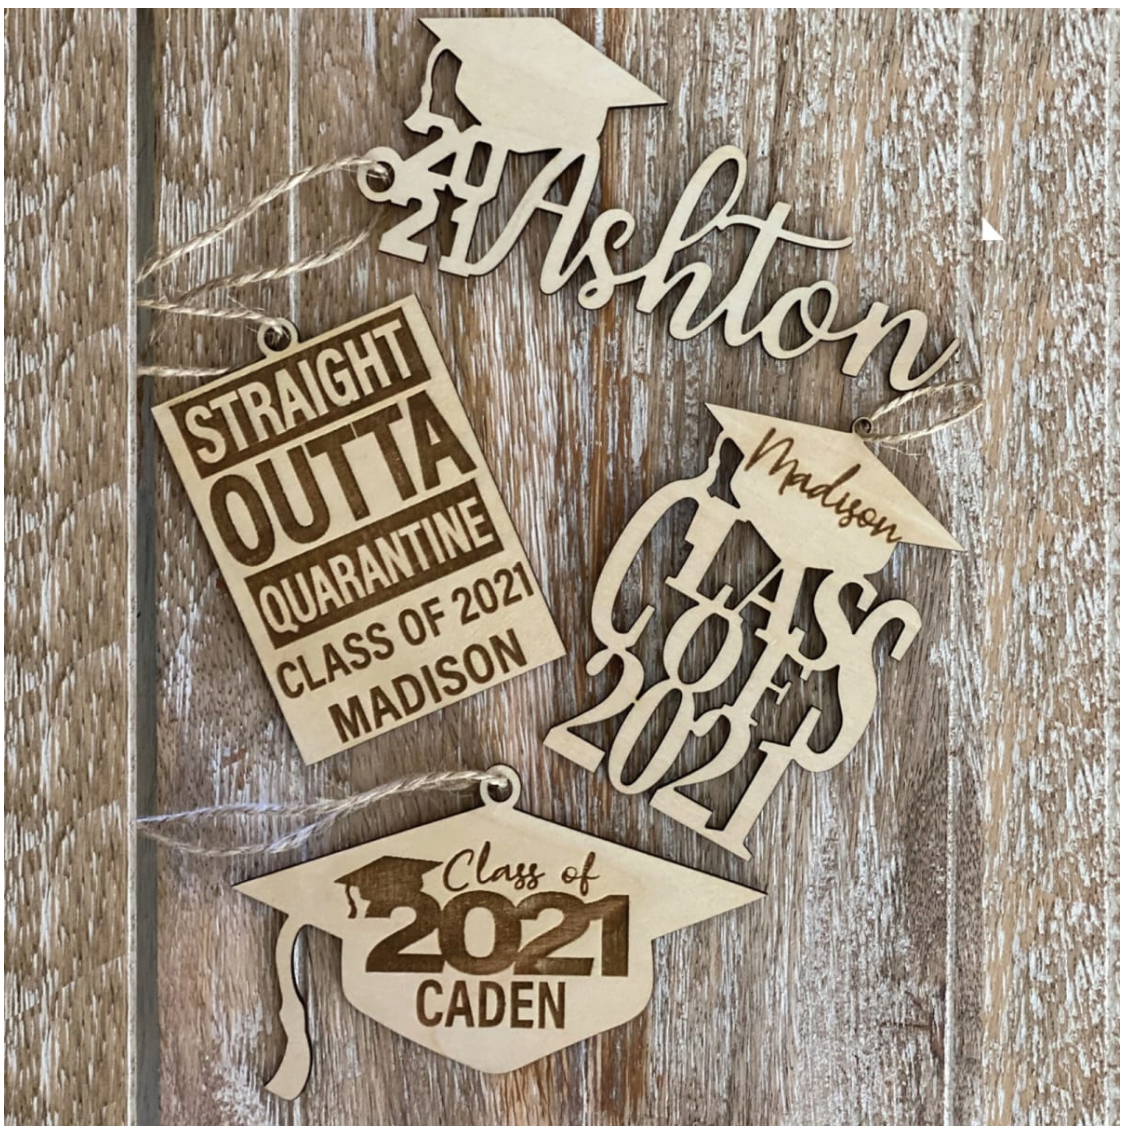 Personalized Graduation Keepsake Ornaments or Gift Tags